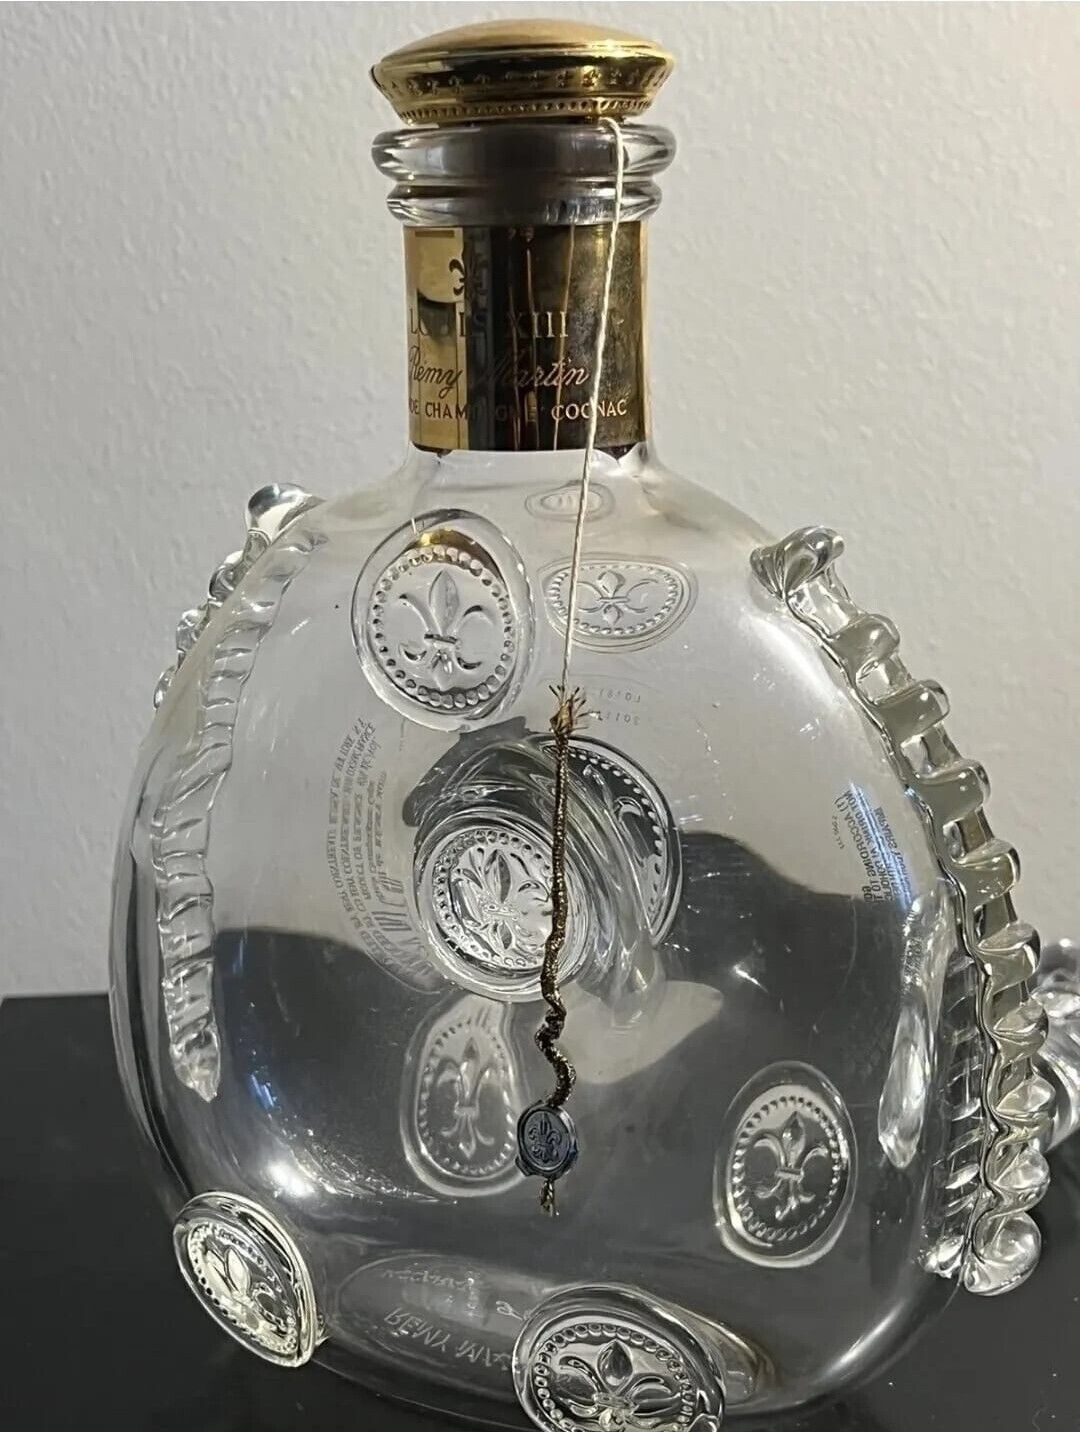 EMPTY Louis XIII 13 Remy Martin Grande Champagne Cognac , Box With Little Damage